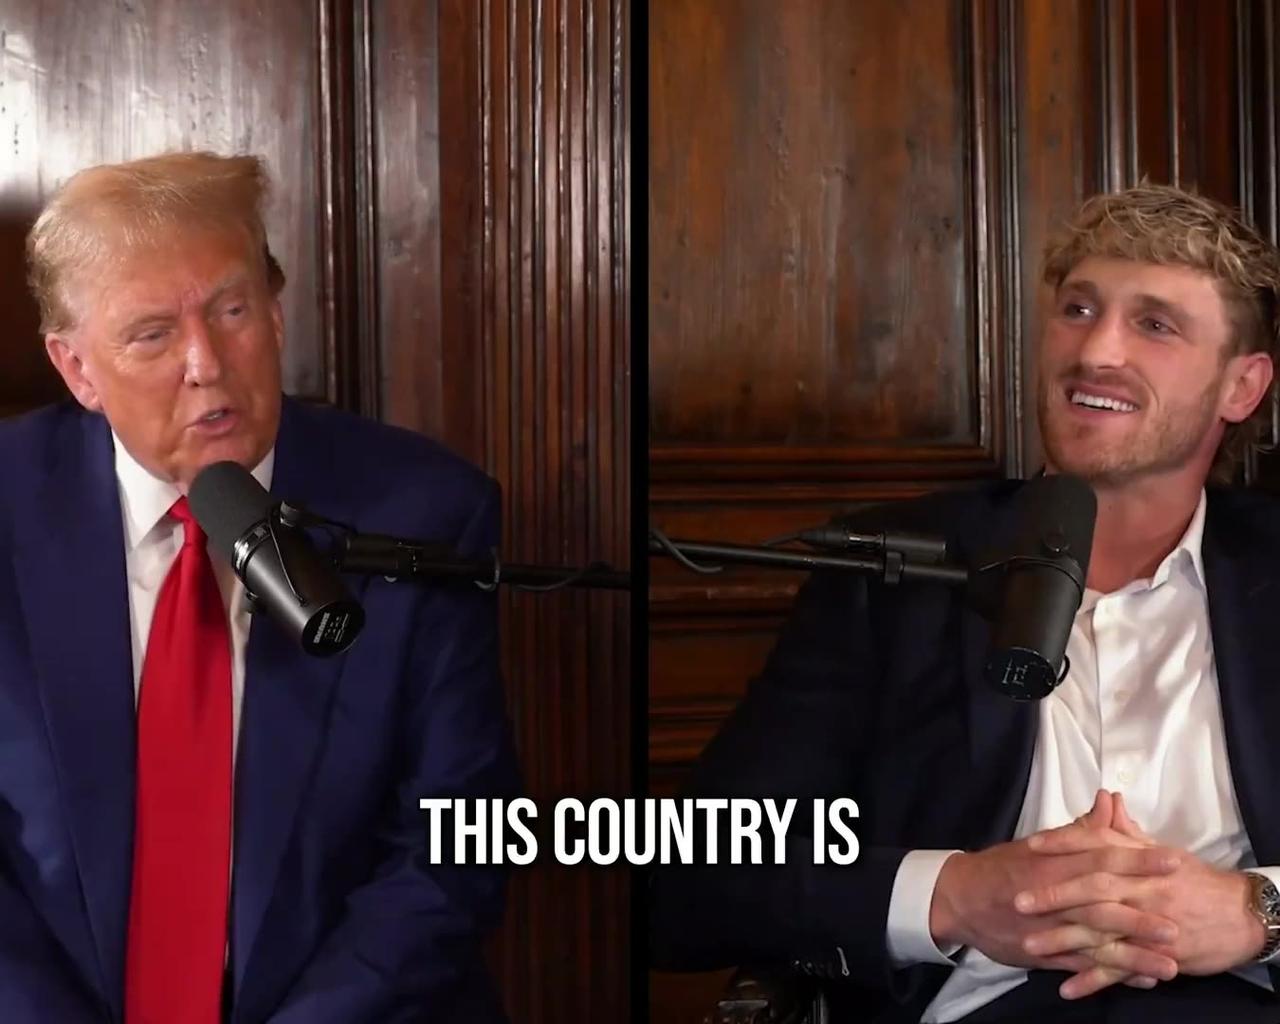 Trump Surprises Logan Paul With One Simple Message to Voters